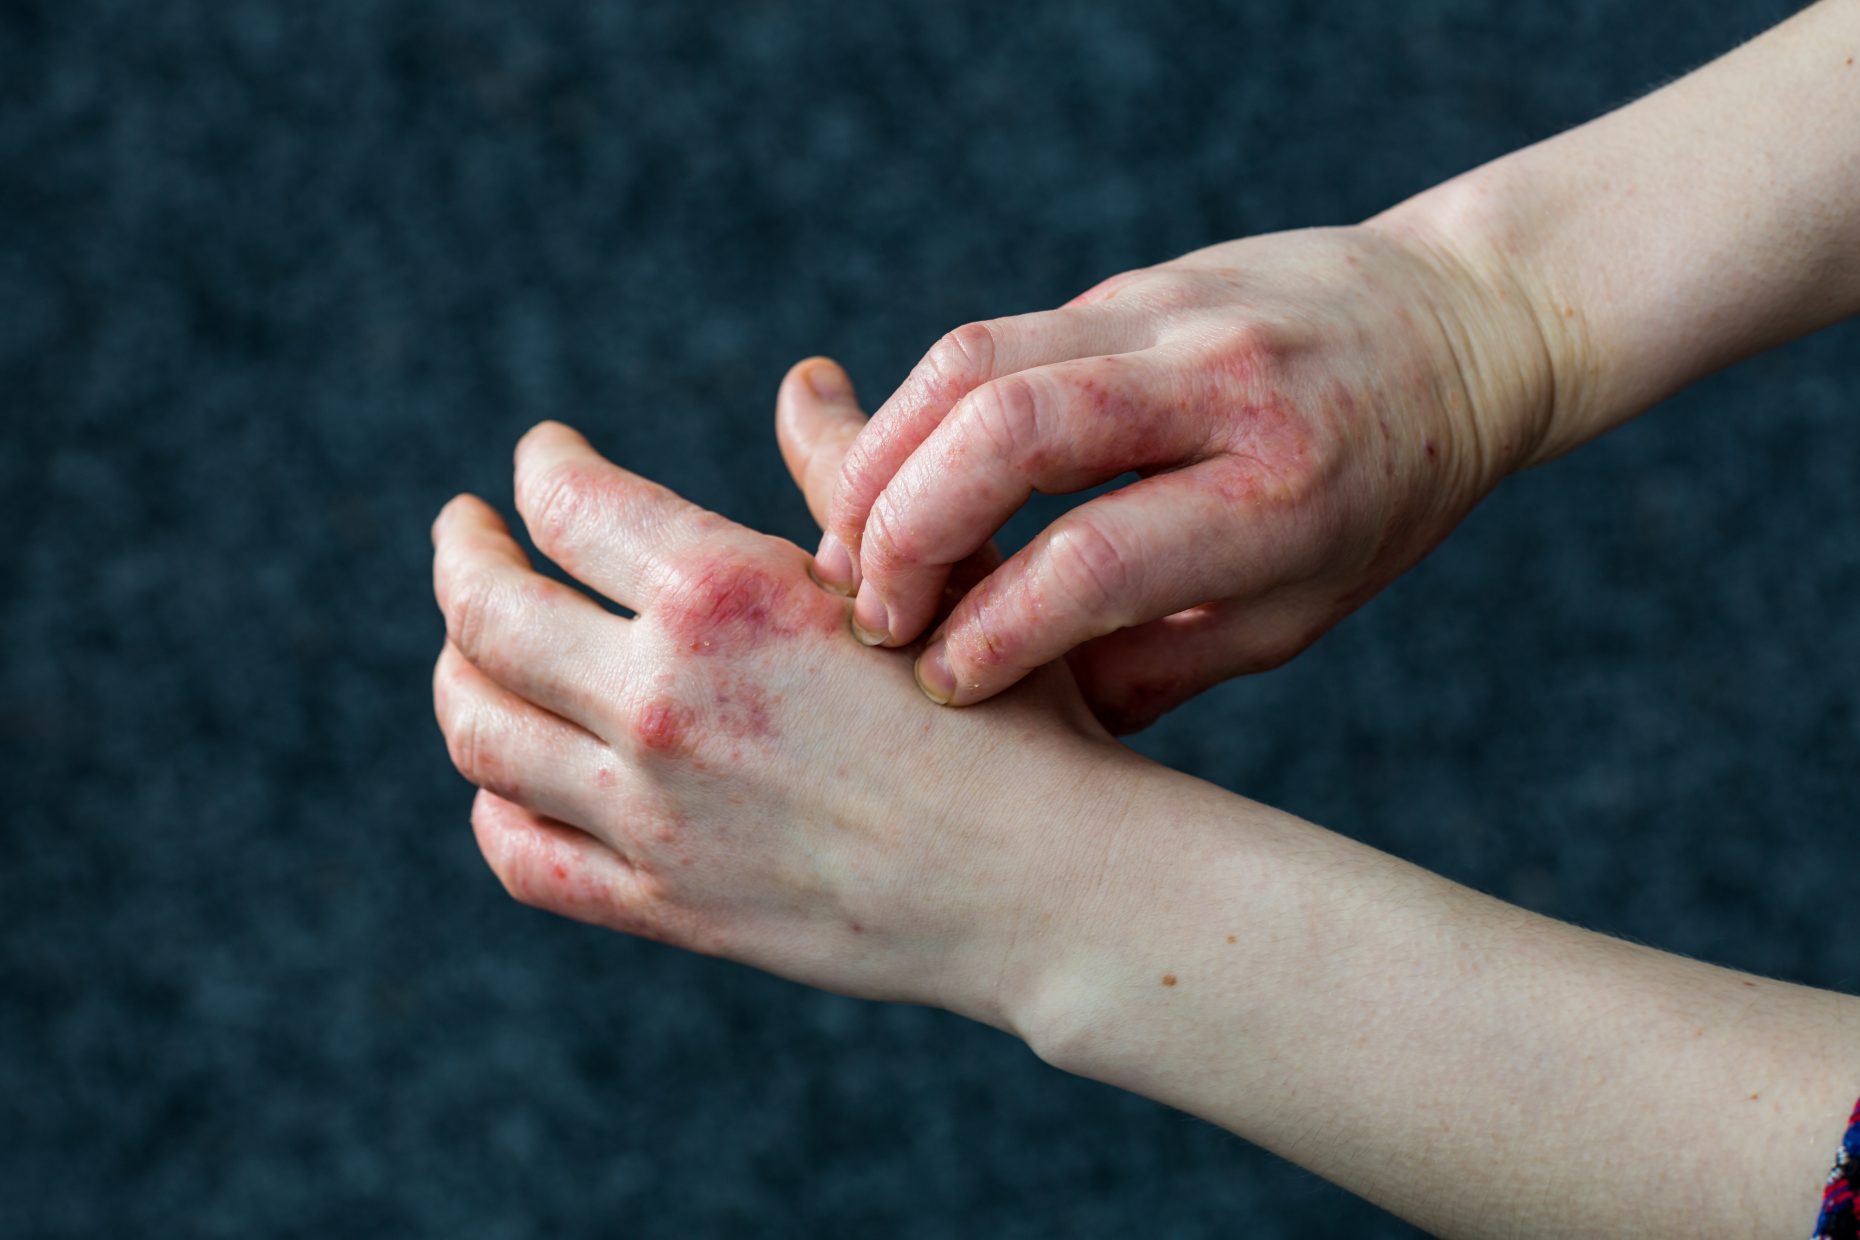 Contact dermatitis covered hands